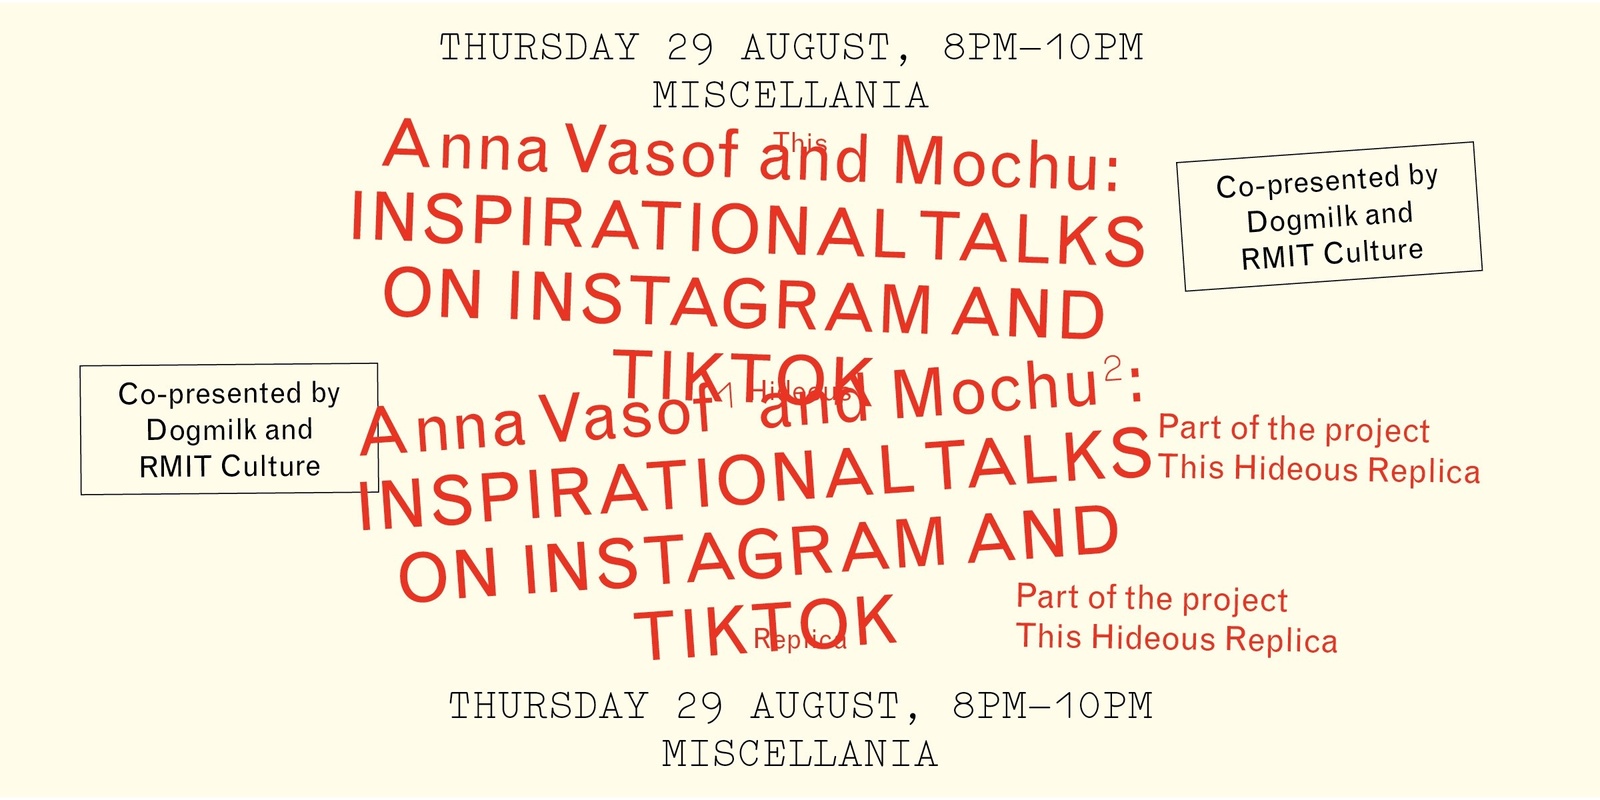 Banner image for RMIT Culture and Dogmilk pres. Anna Vasof and Mochu: inspirational talks on Instagram and TikTok.